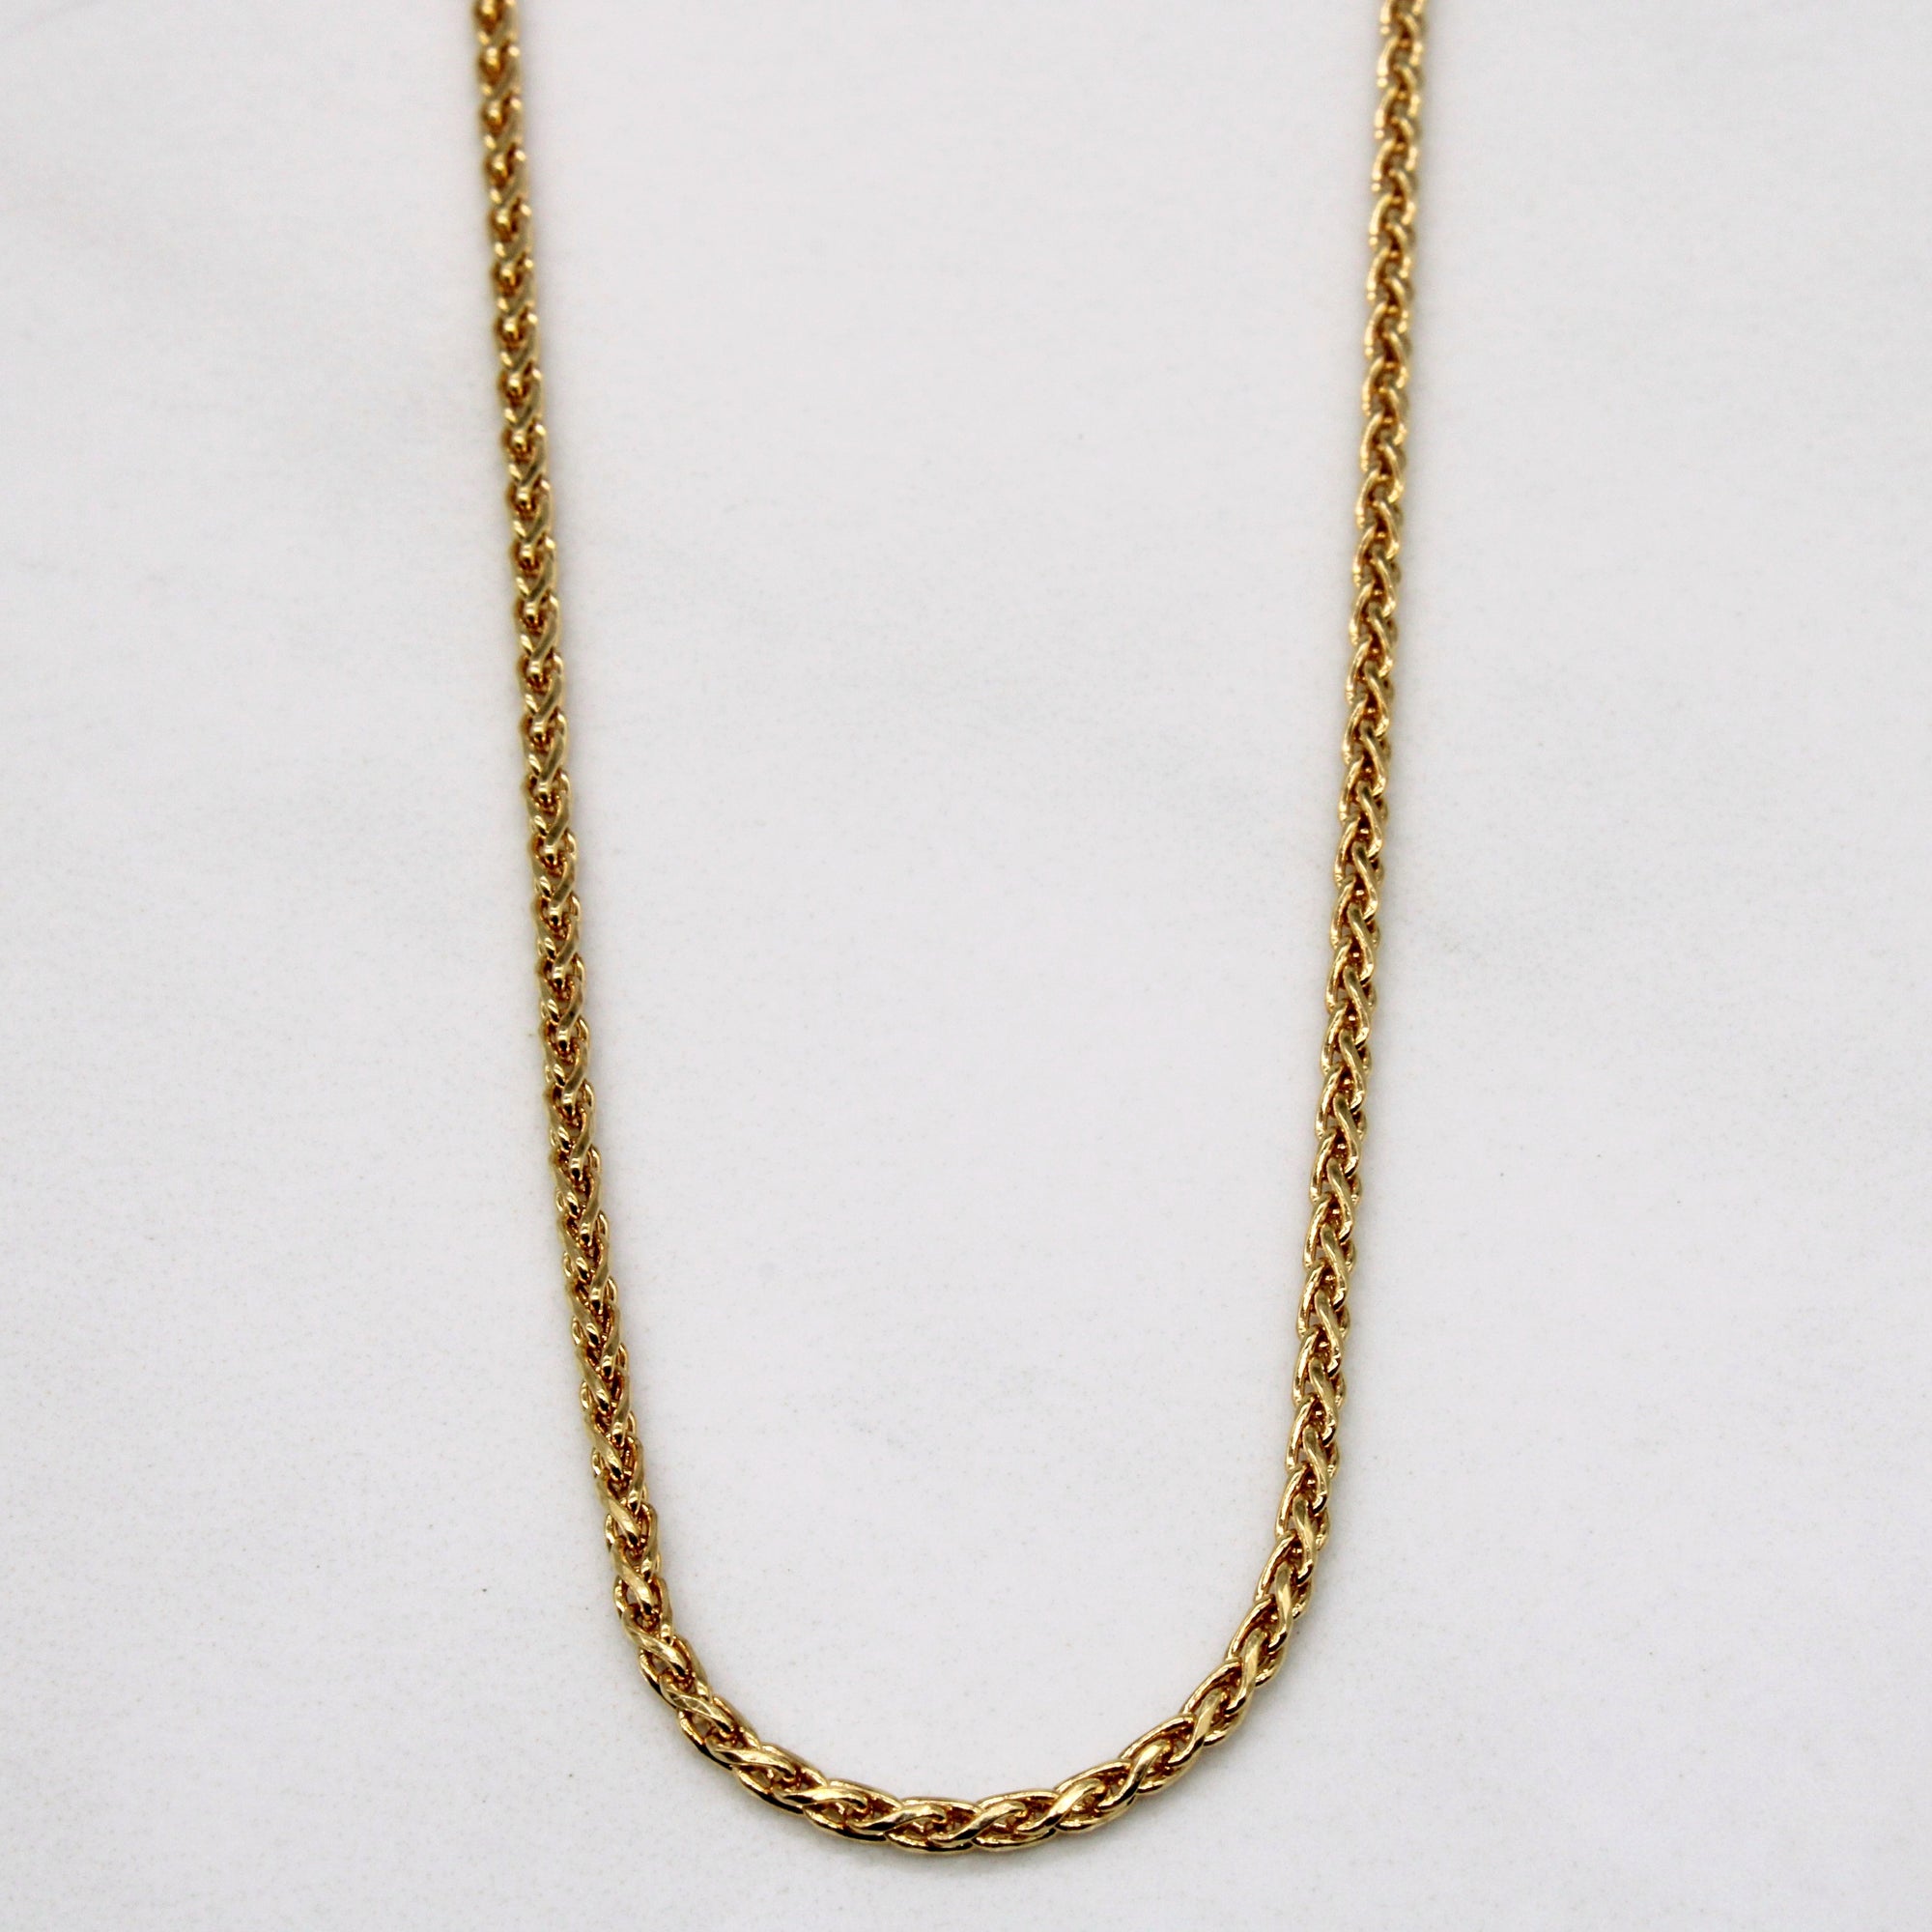 10k Yellow Gold Birdcage Link Chain | 20